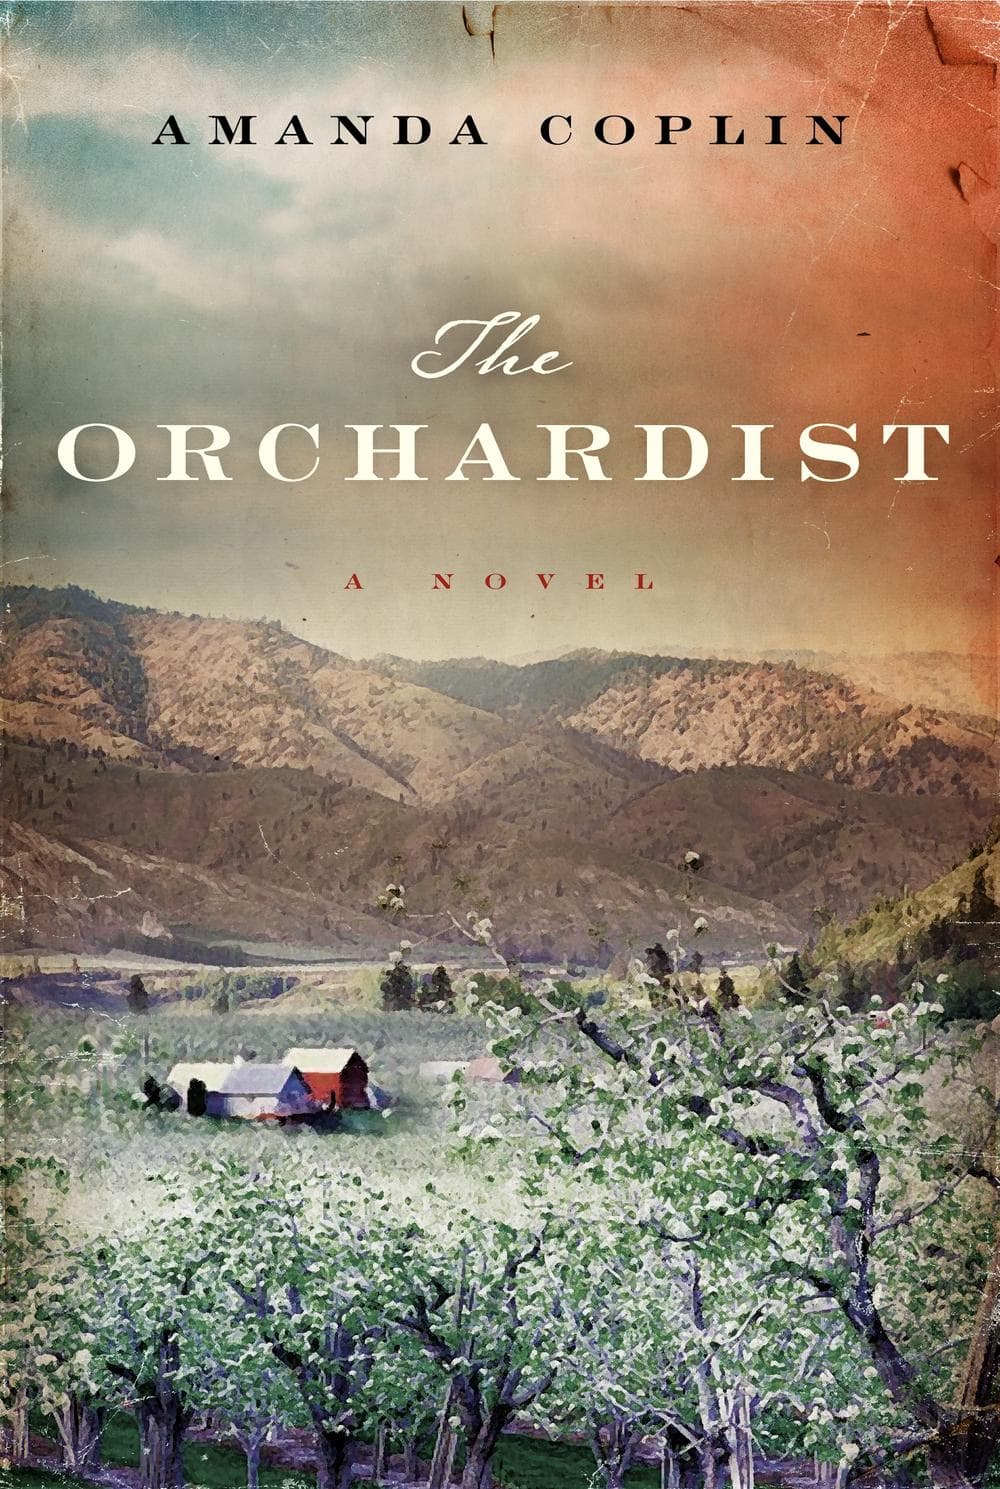 The Orchardist book cover